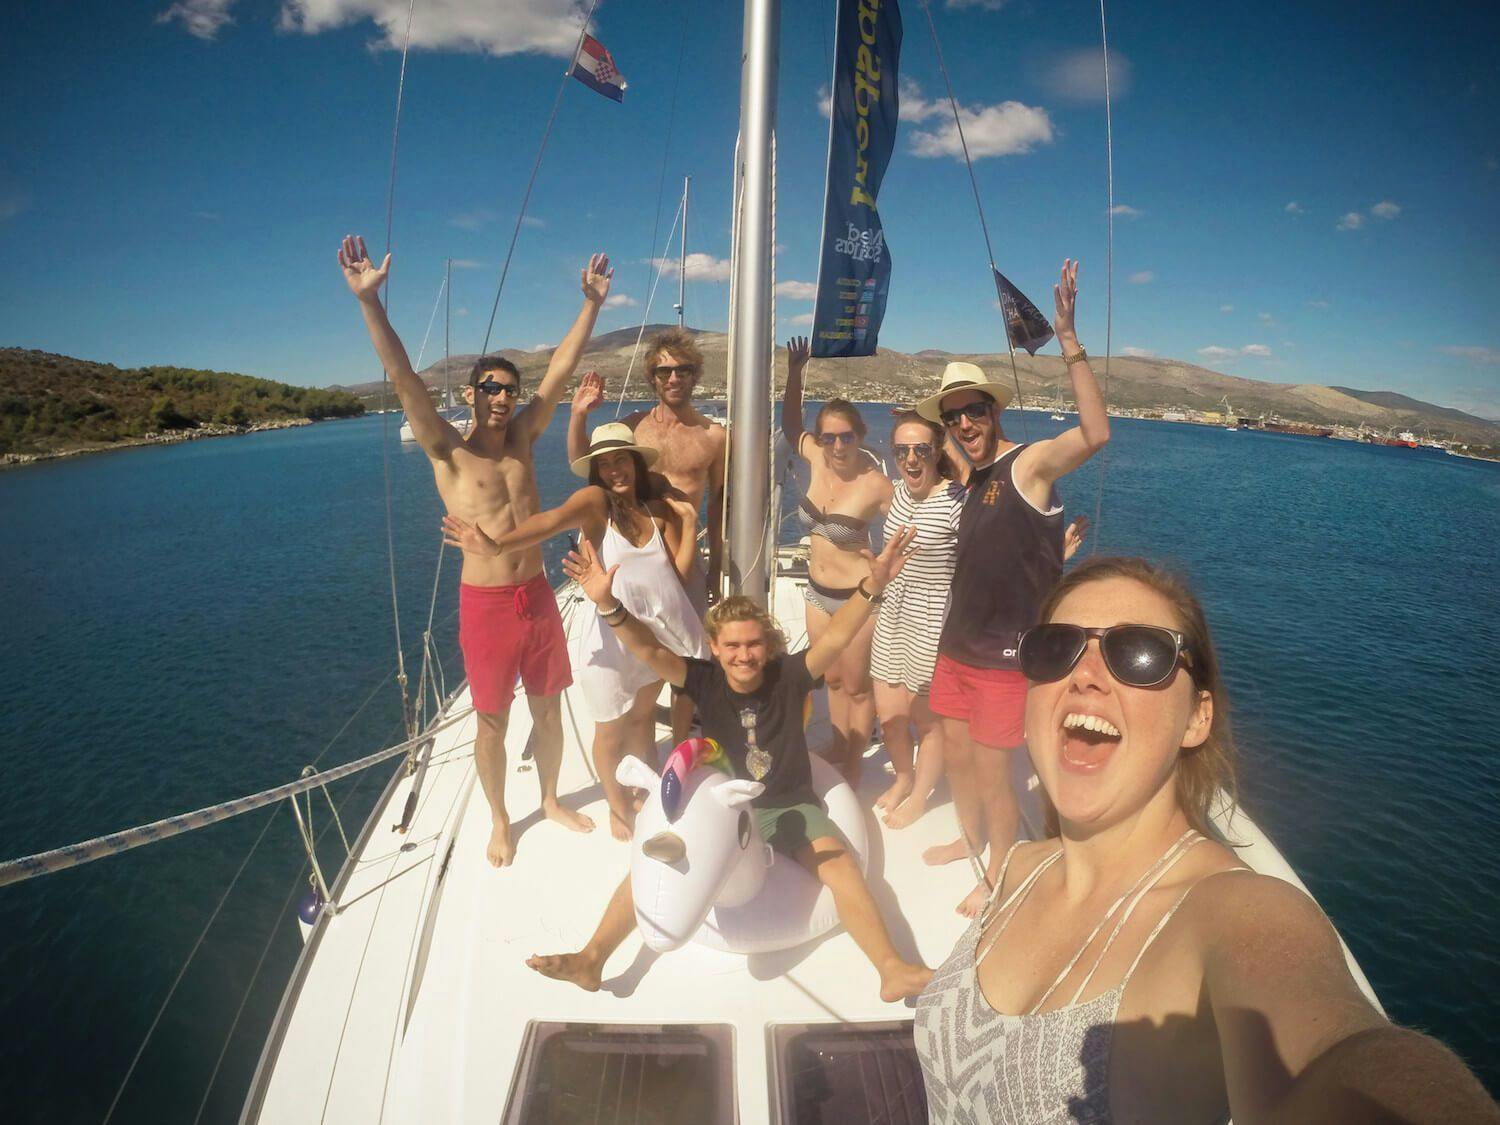 Highlights Sailing in Croatia with MedSailors. Article by Lou Burton of Tanned Toned & Travelled Blog.